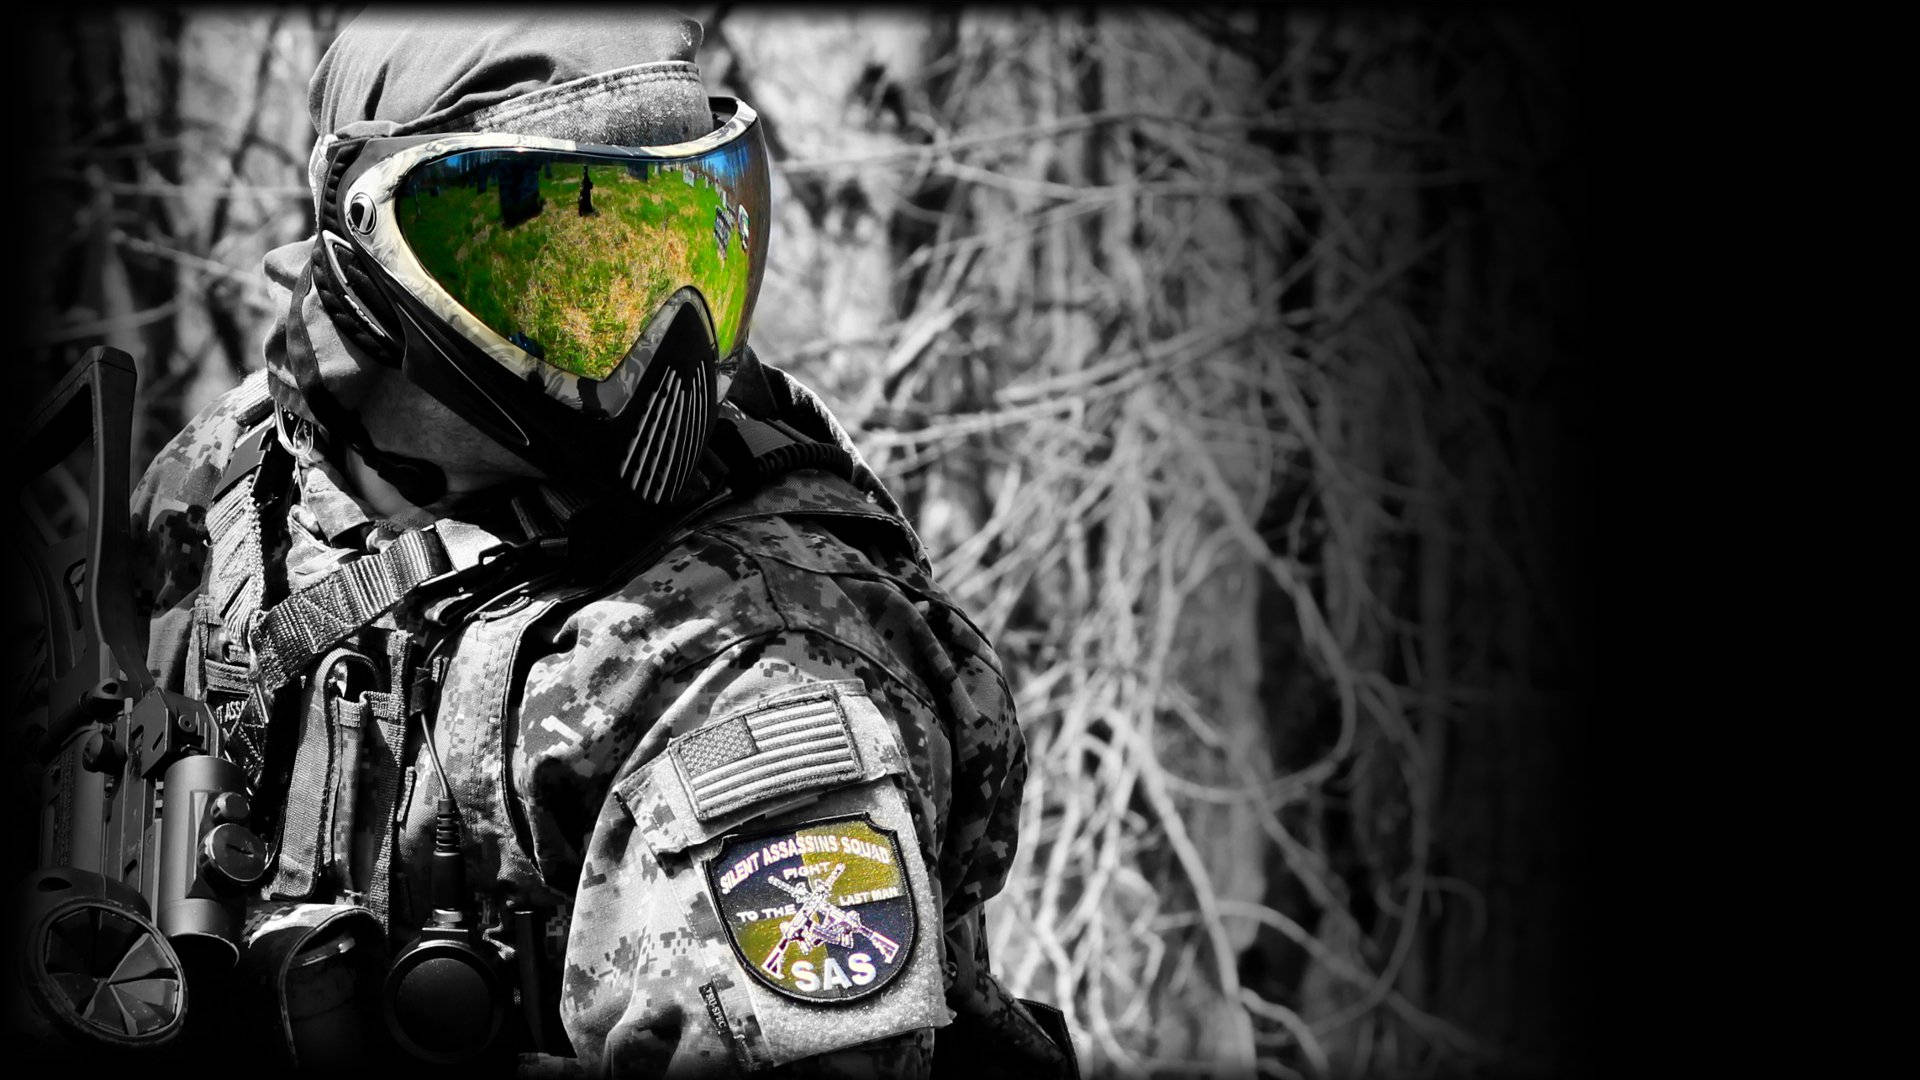 Paintball pro clad in full gear with helmet during an exciting match. Wallpaper